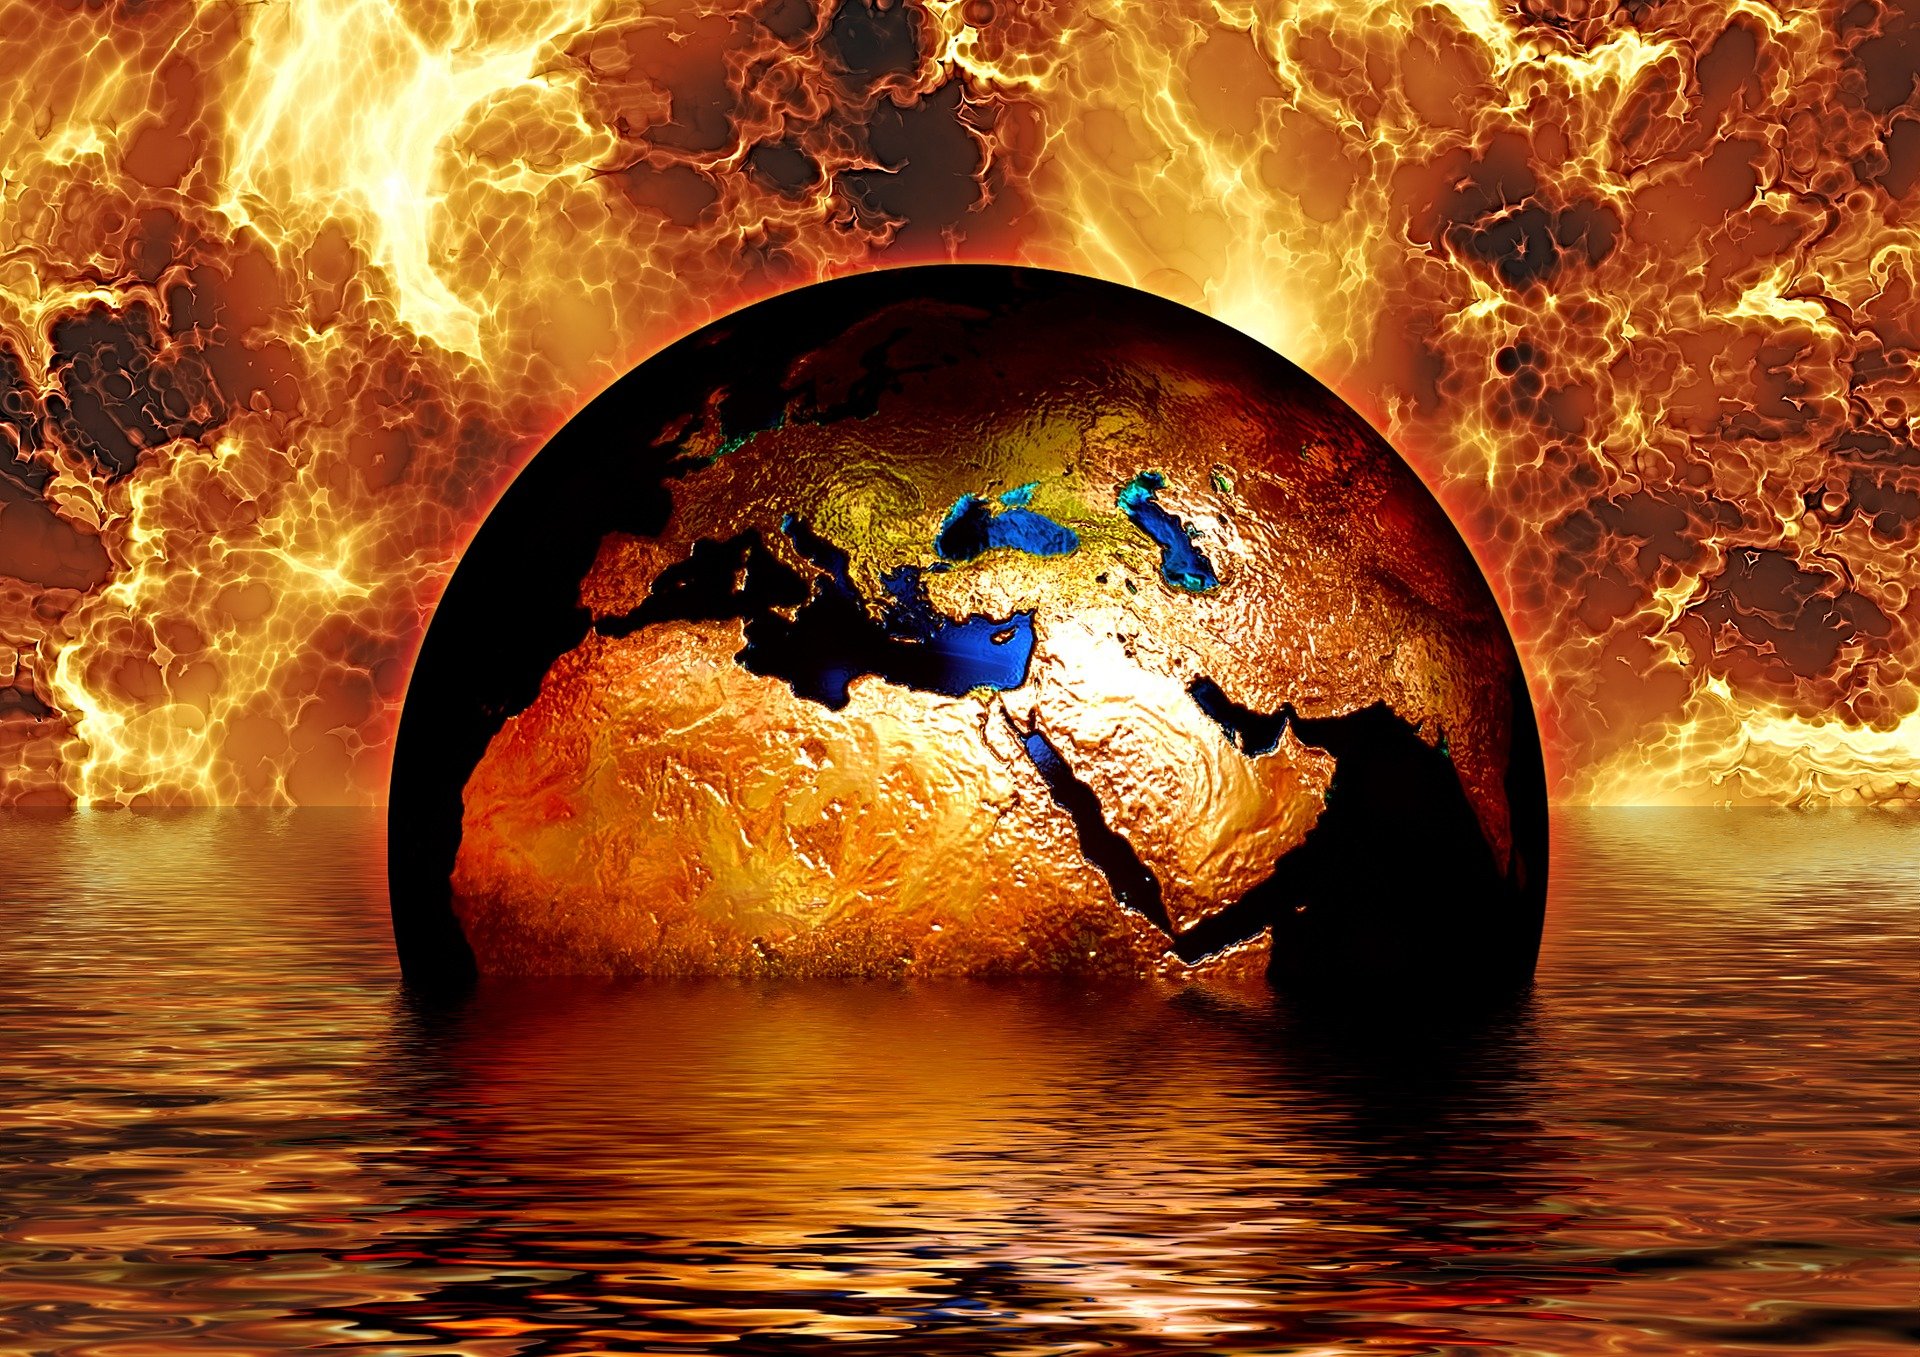 RealClimate: The AMOC: tipping this century, or not?